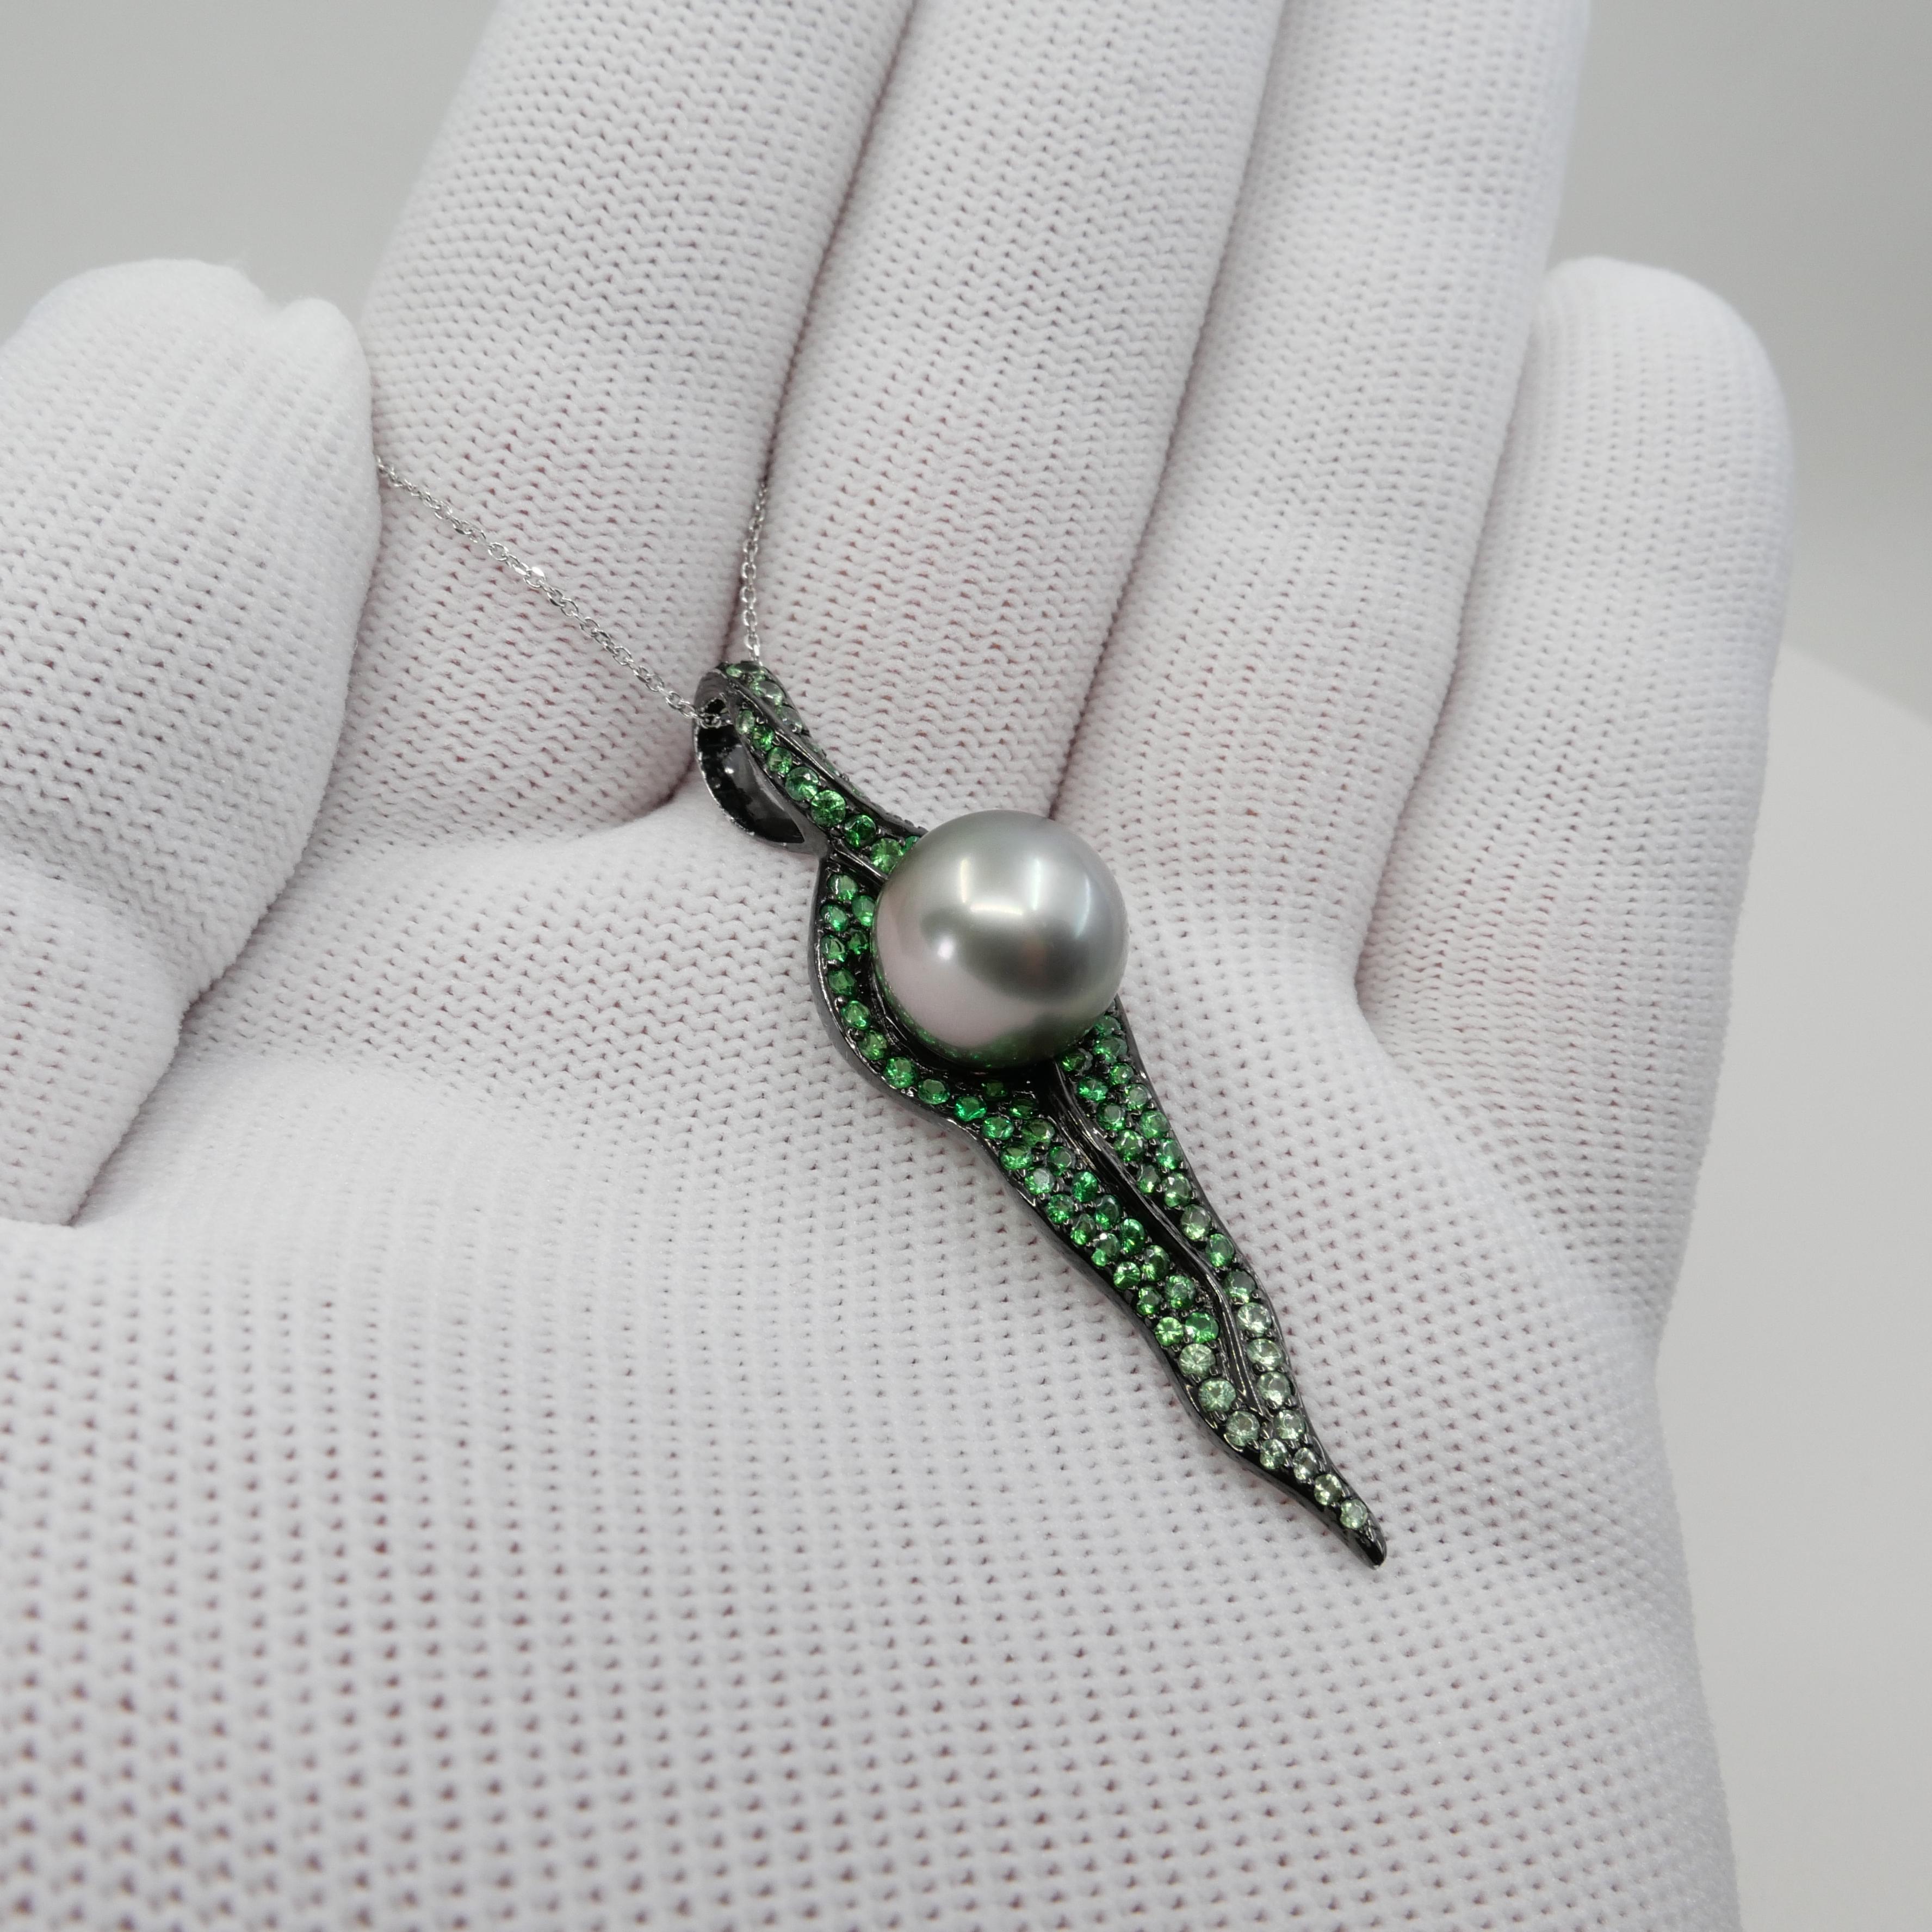 18k Black Gold, Tsavorite Green Garnet & South Sea Pearl Drop Pendant Necklace In New Condition For Sale In Hong Kong, HK